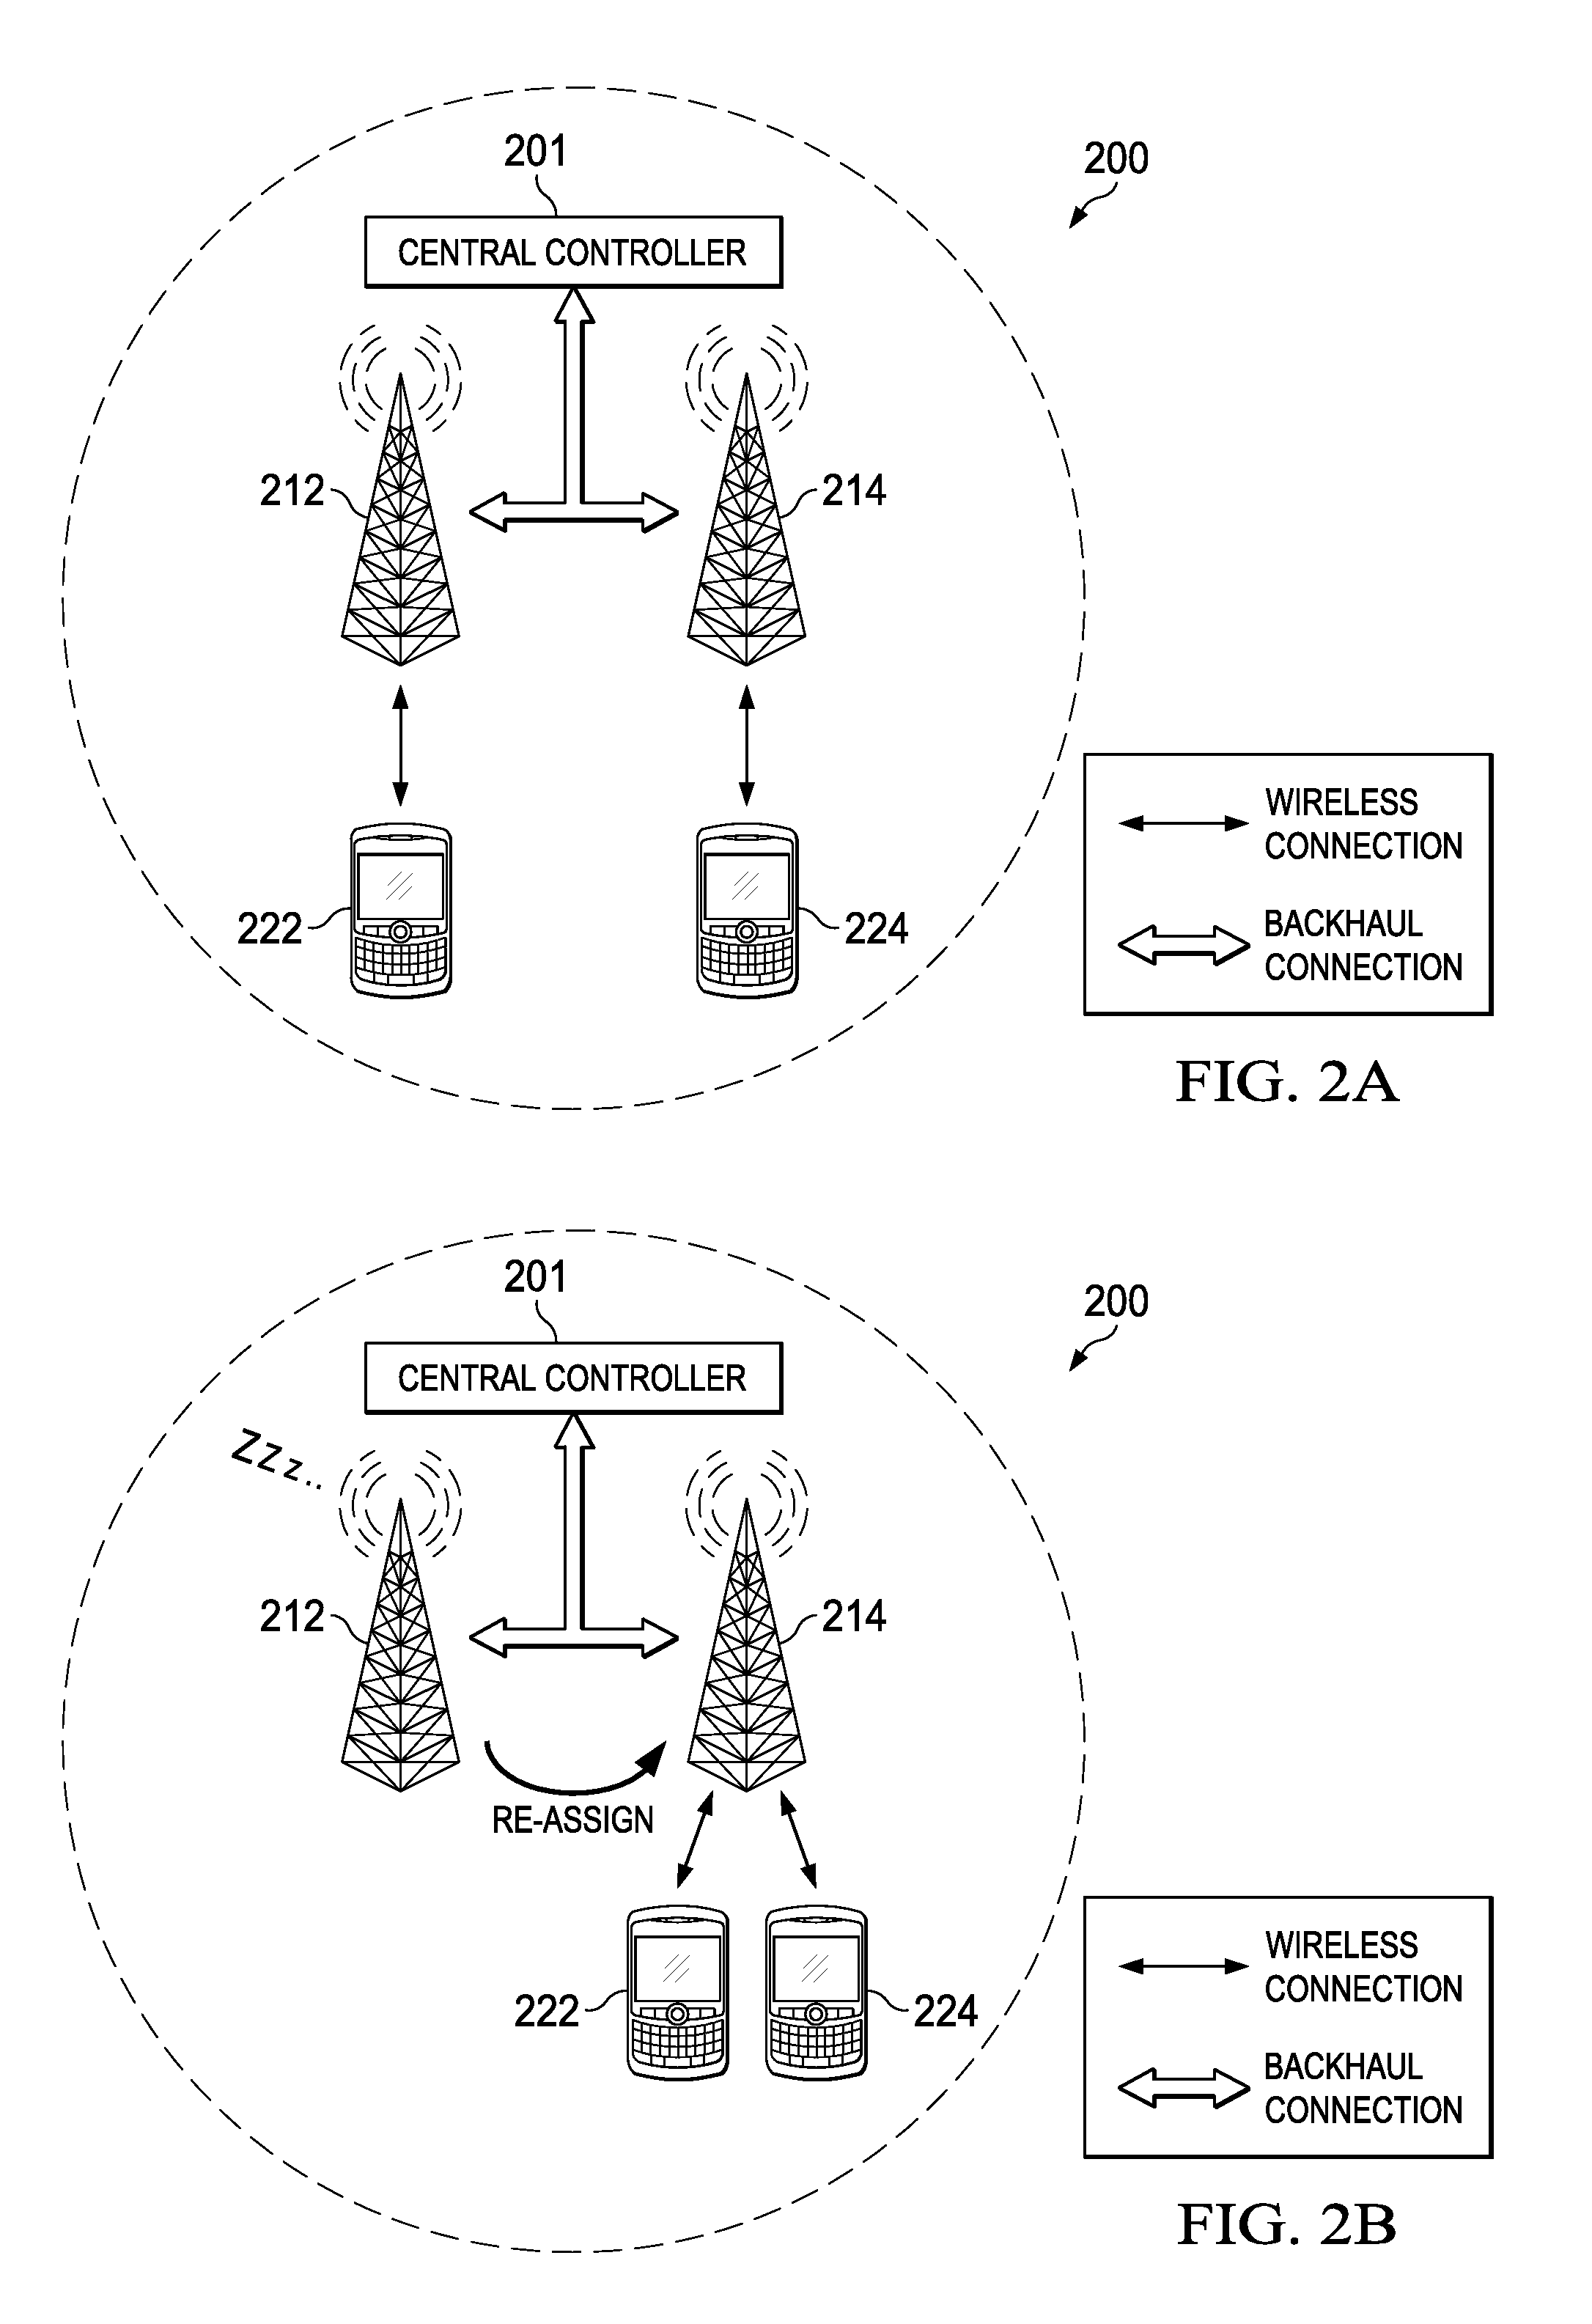 Methods for Dynamic Traffic Offloading and Transmit Point (TP) Muting for Energy Efficiency in Virtual Radio Access Network (V-RAN)